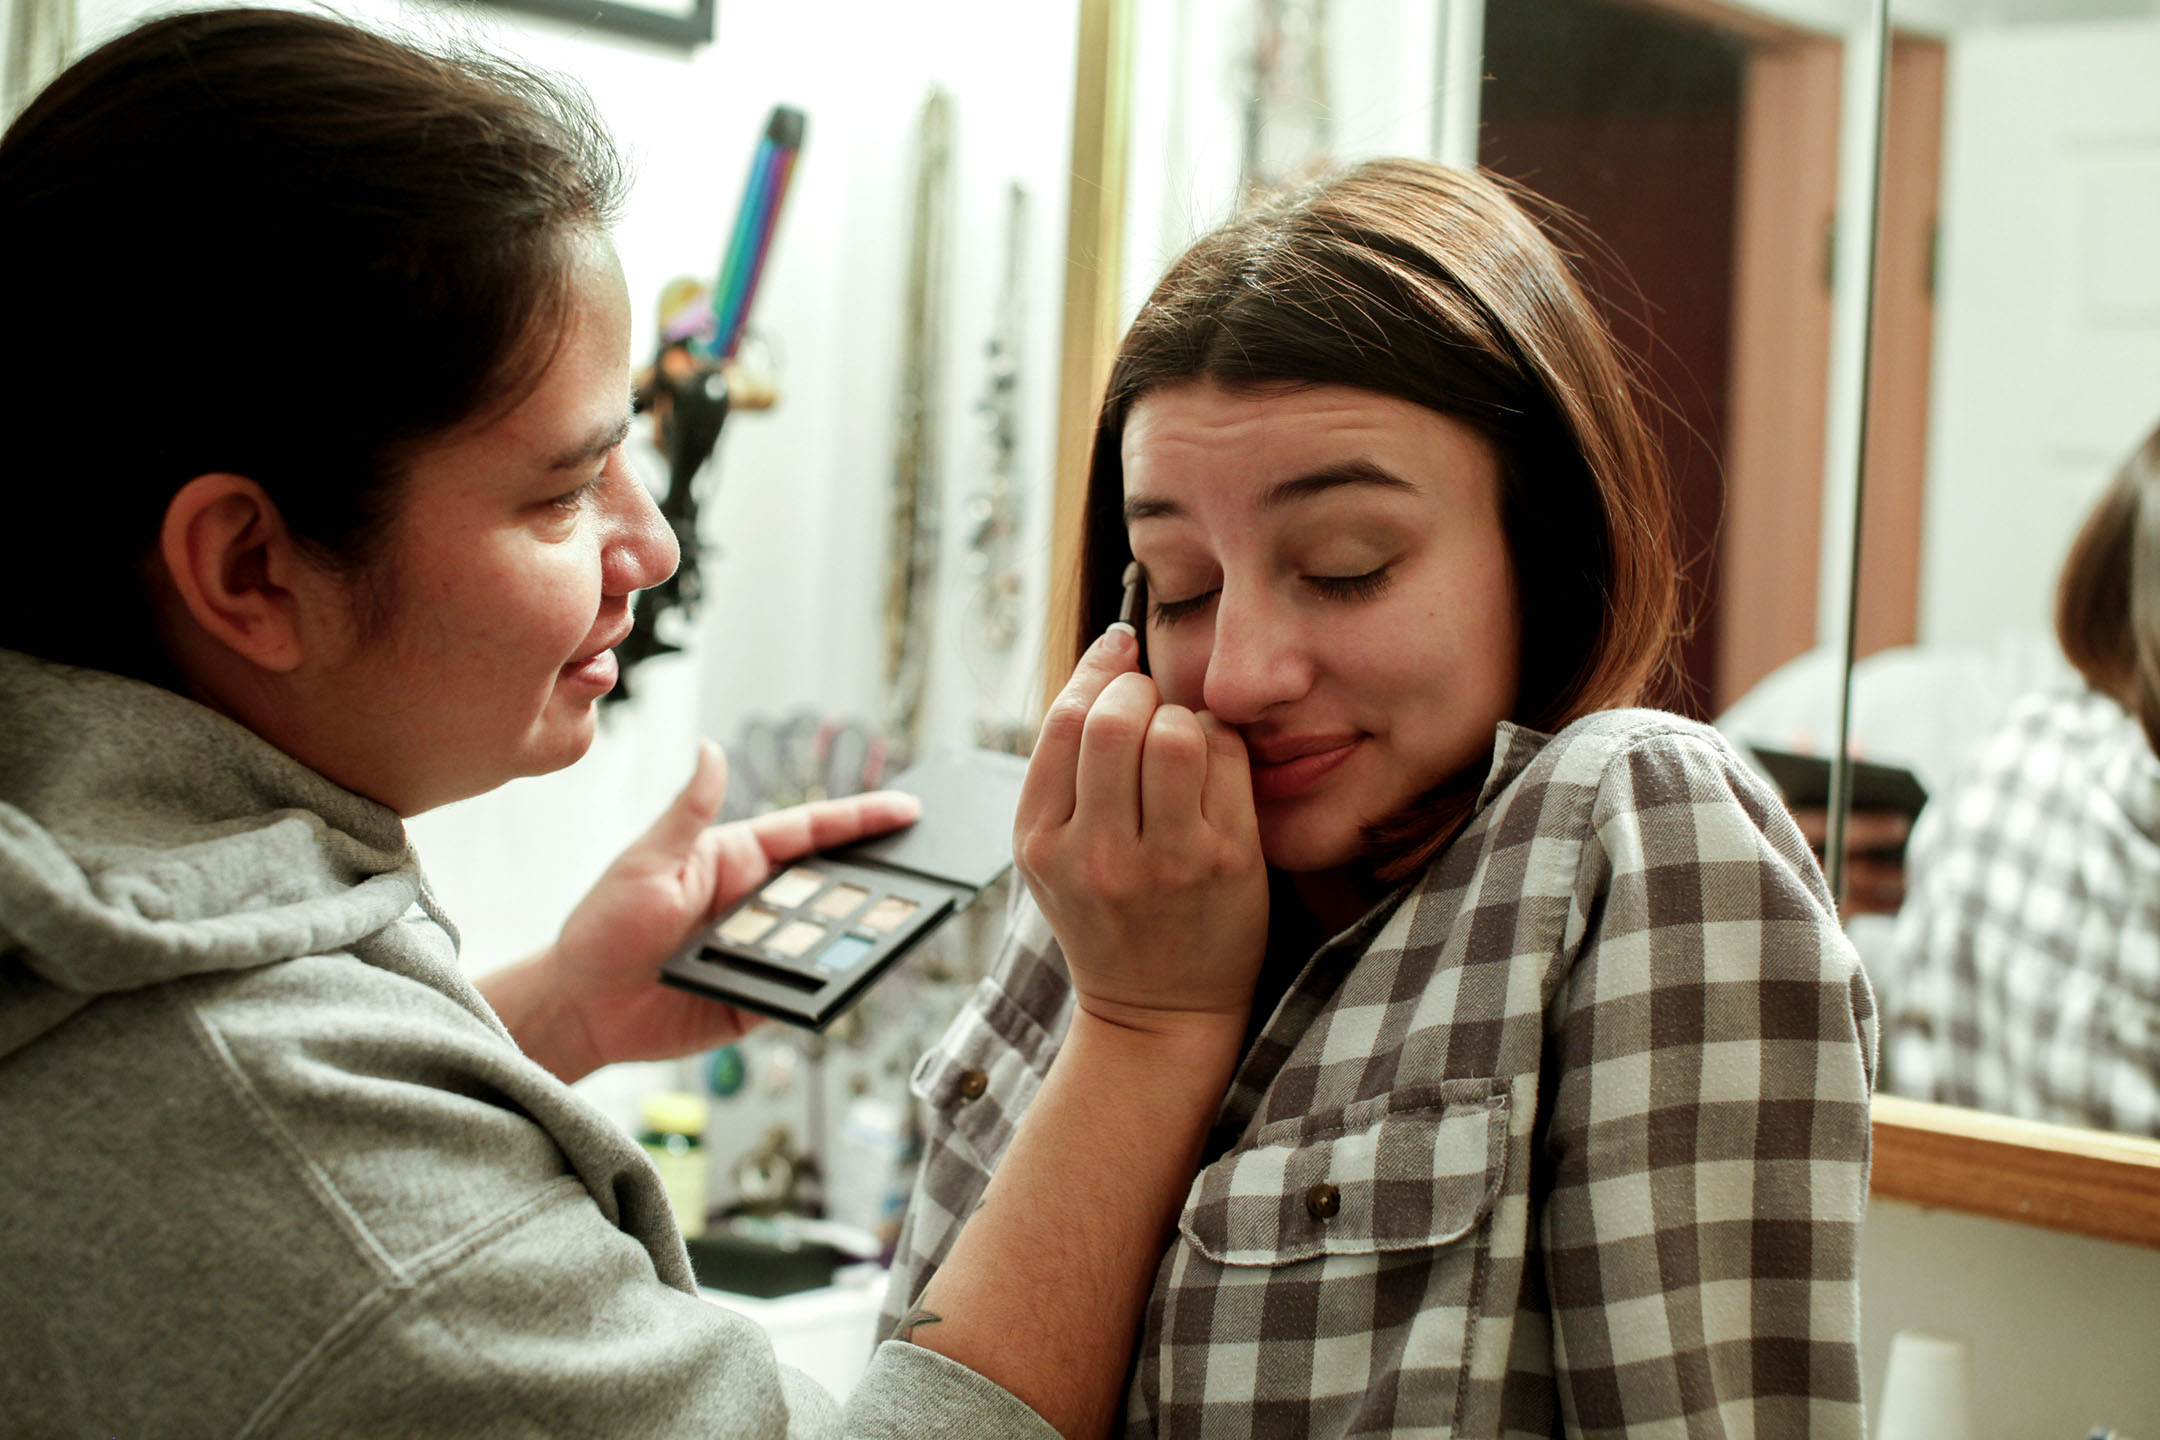 Annesha Anderson helps her daughter JaNessa put on makeup before school. JaNessa was diagnosed with clinical depression a year ago and says she couldn’t get out of bed most days without the help of her mom.